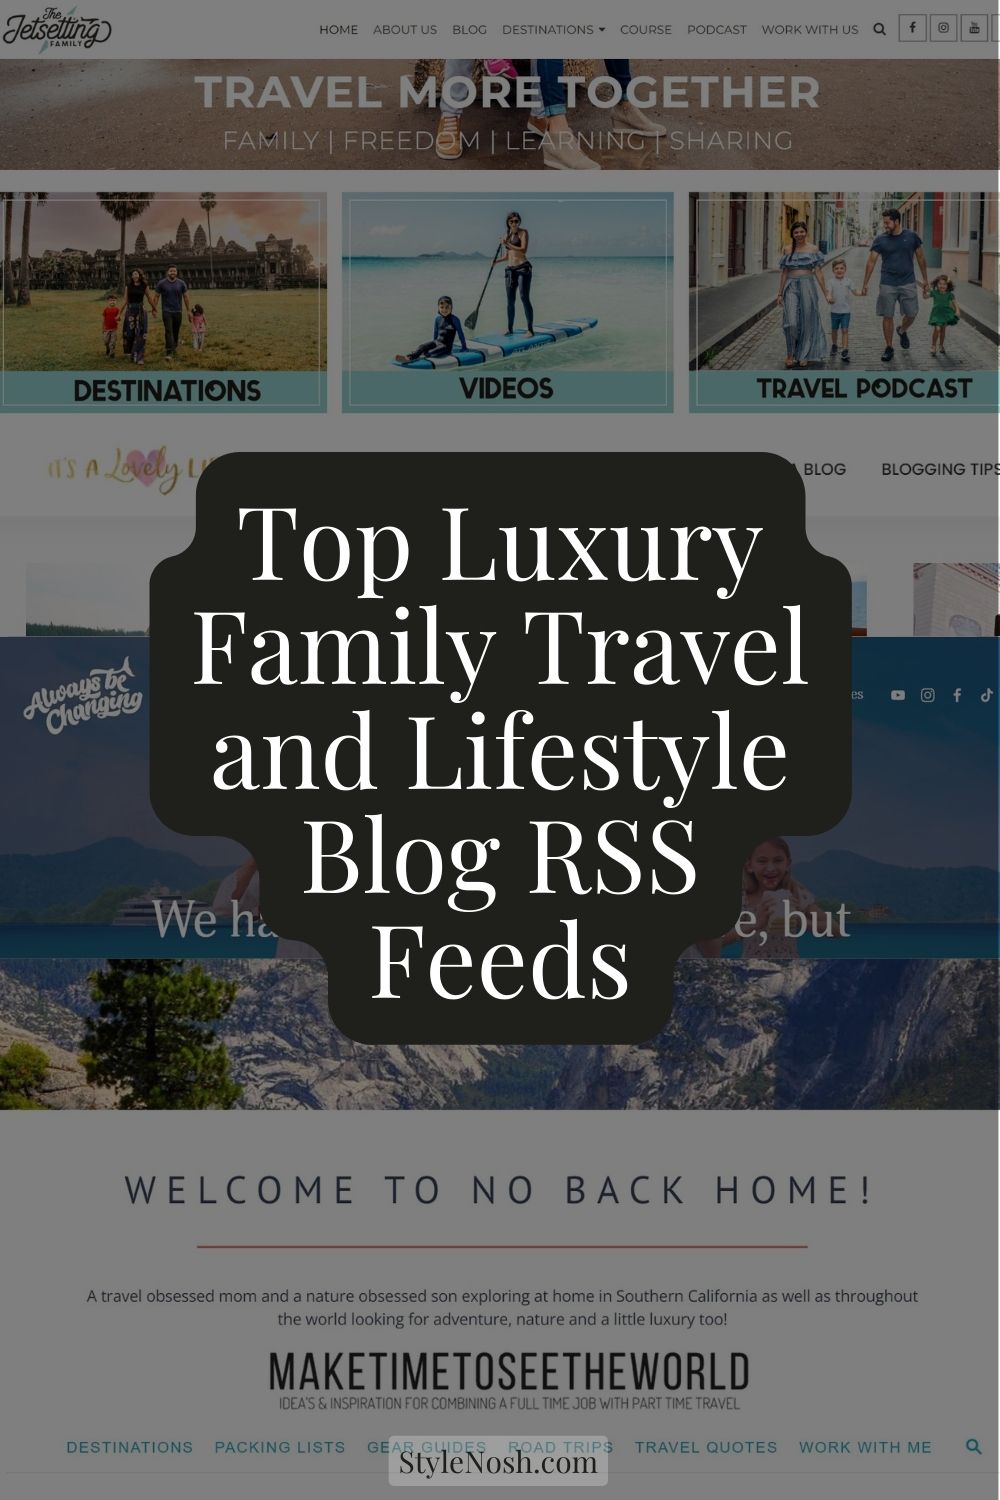 Top Luxury Family Travel and Lifestyle Blog RSS Feeds